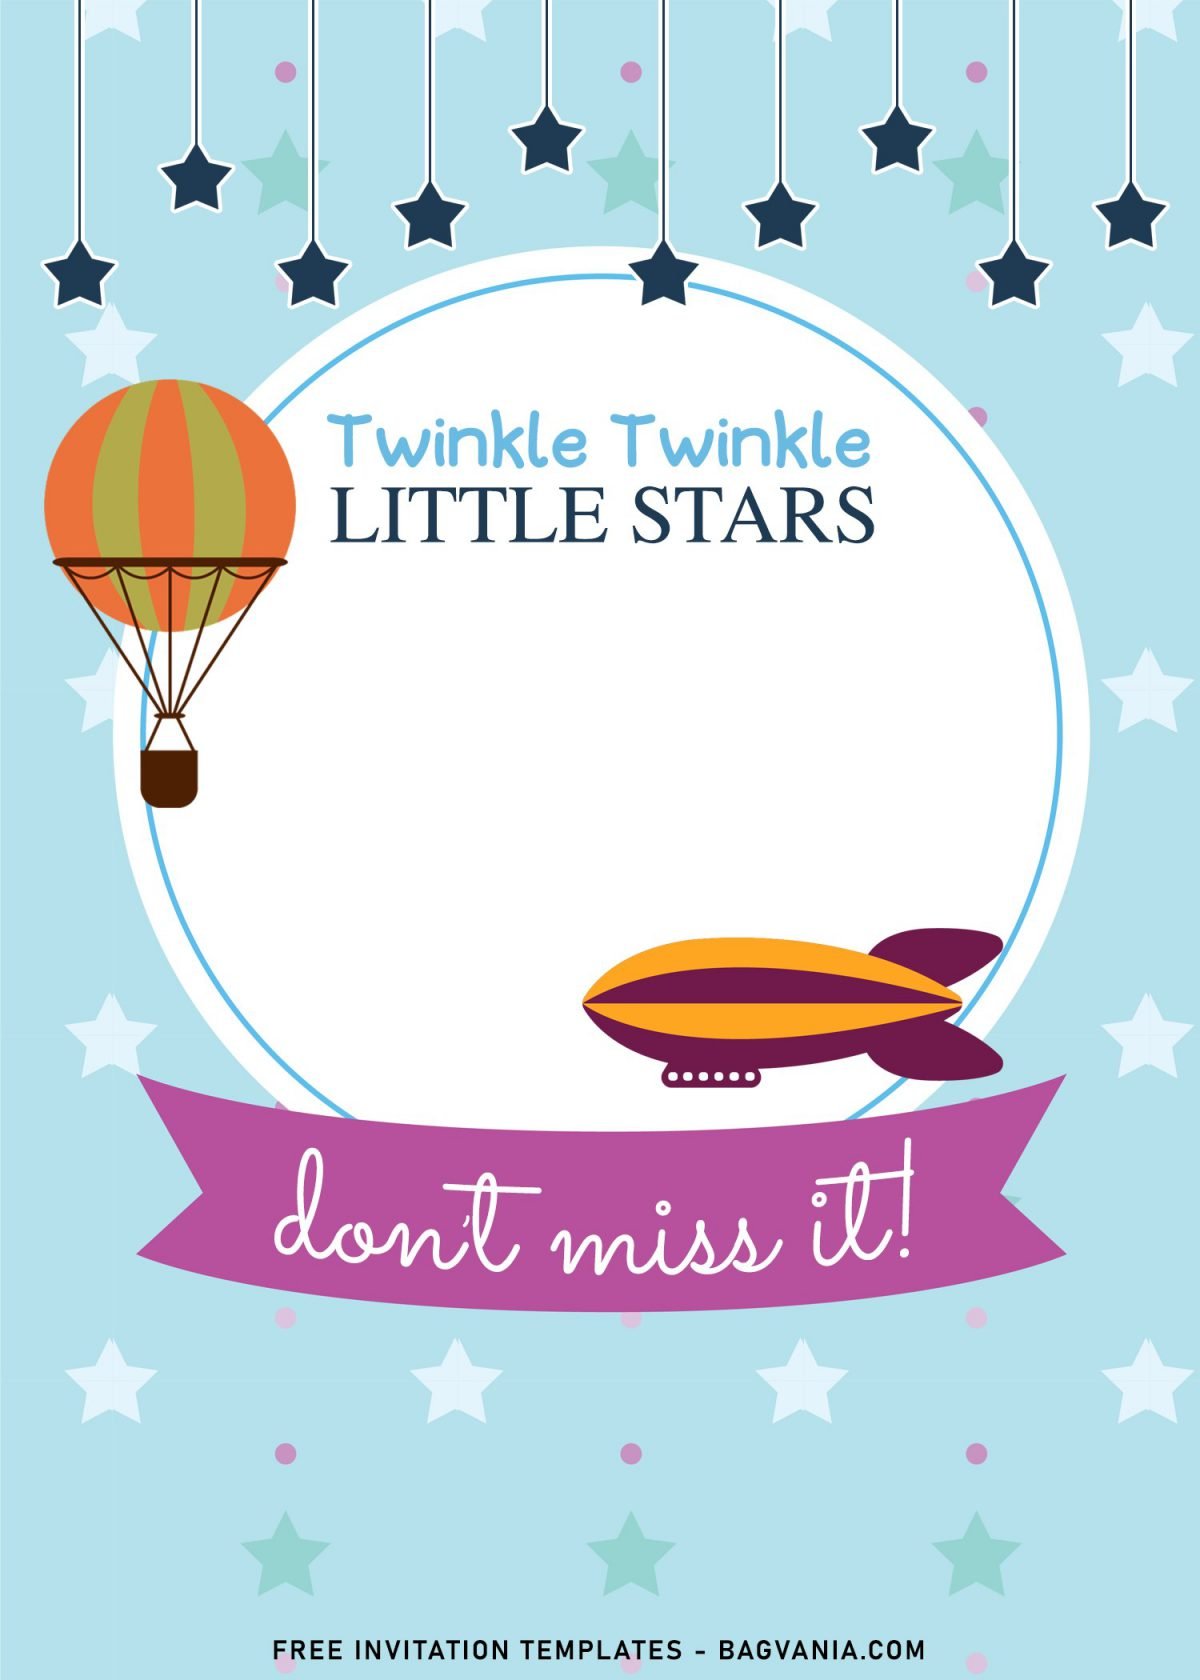 7+ Twinkle Twinkle Little Stars Birthday Invitation Templates For Any Ages and has portrait design